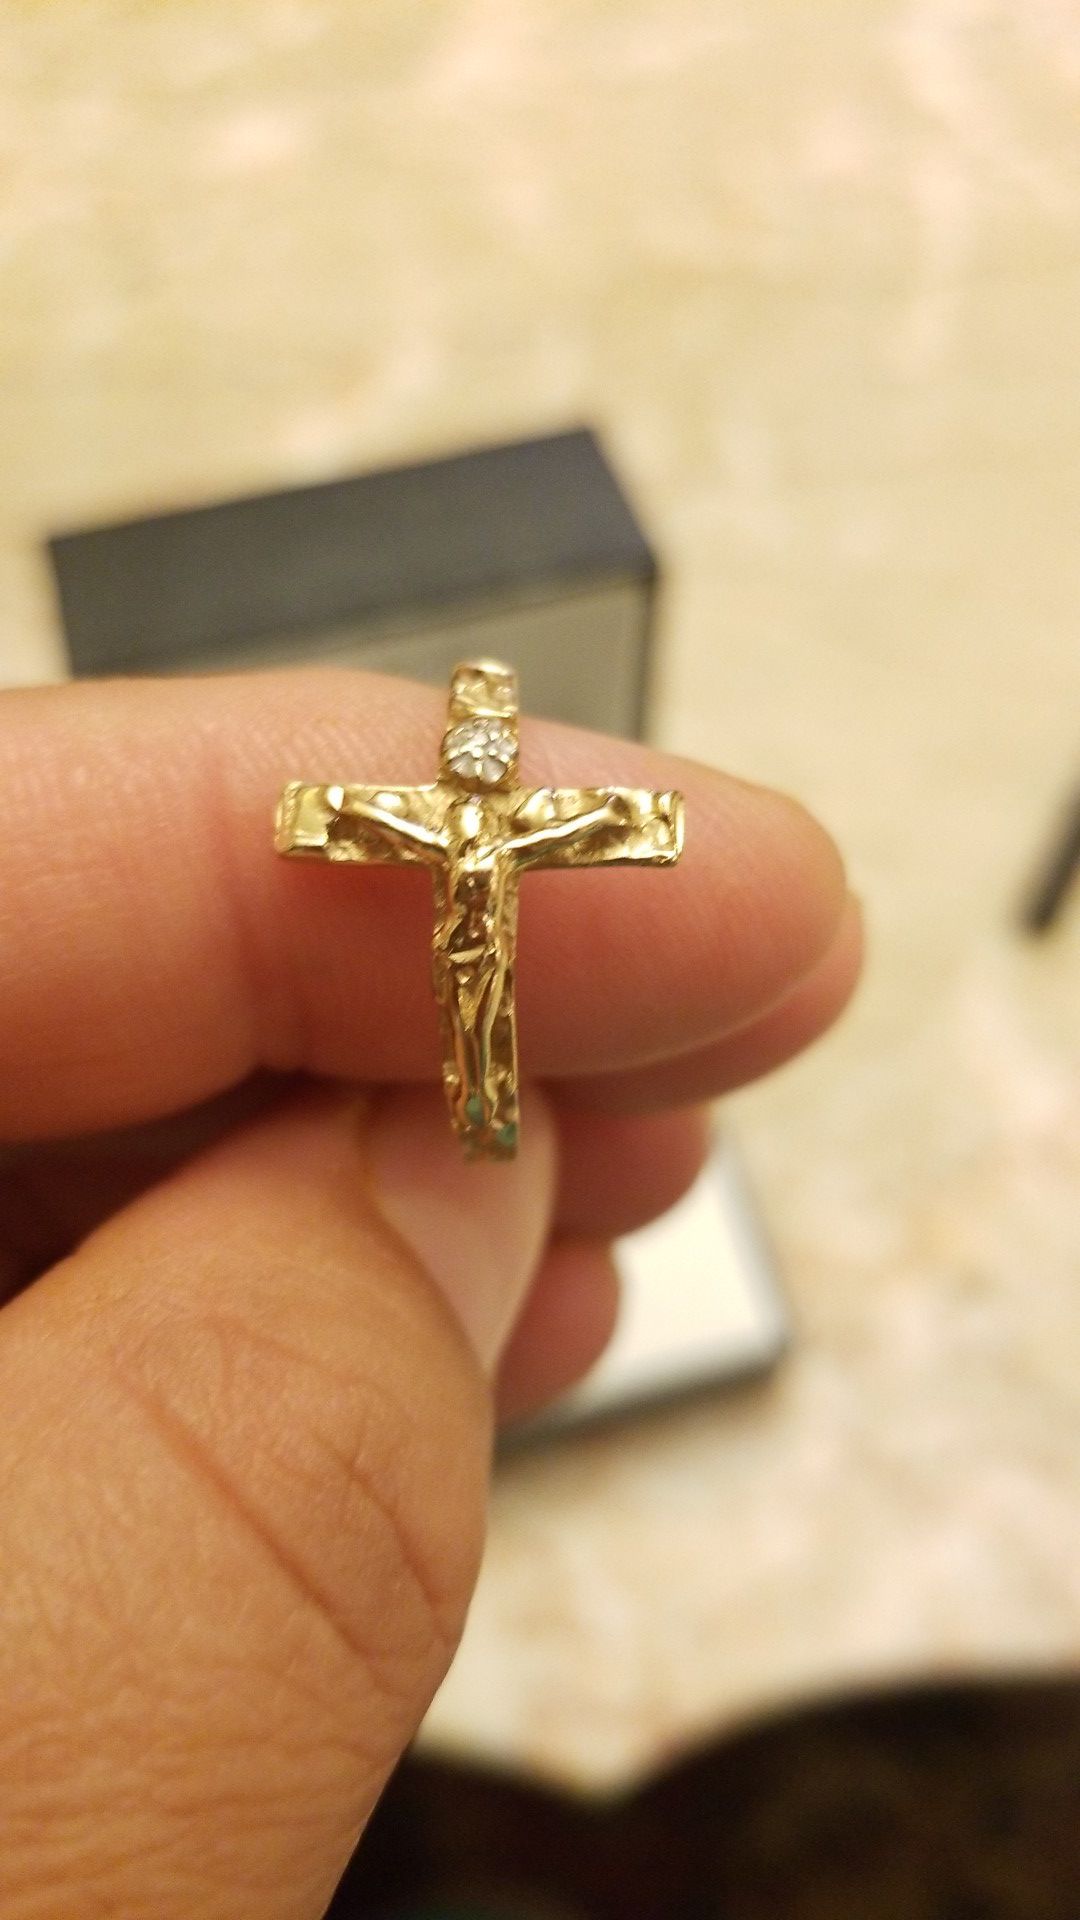 STUNNING GOLD CROSS RING WITH DAIMOND